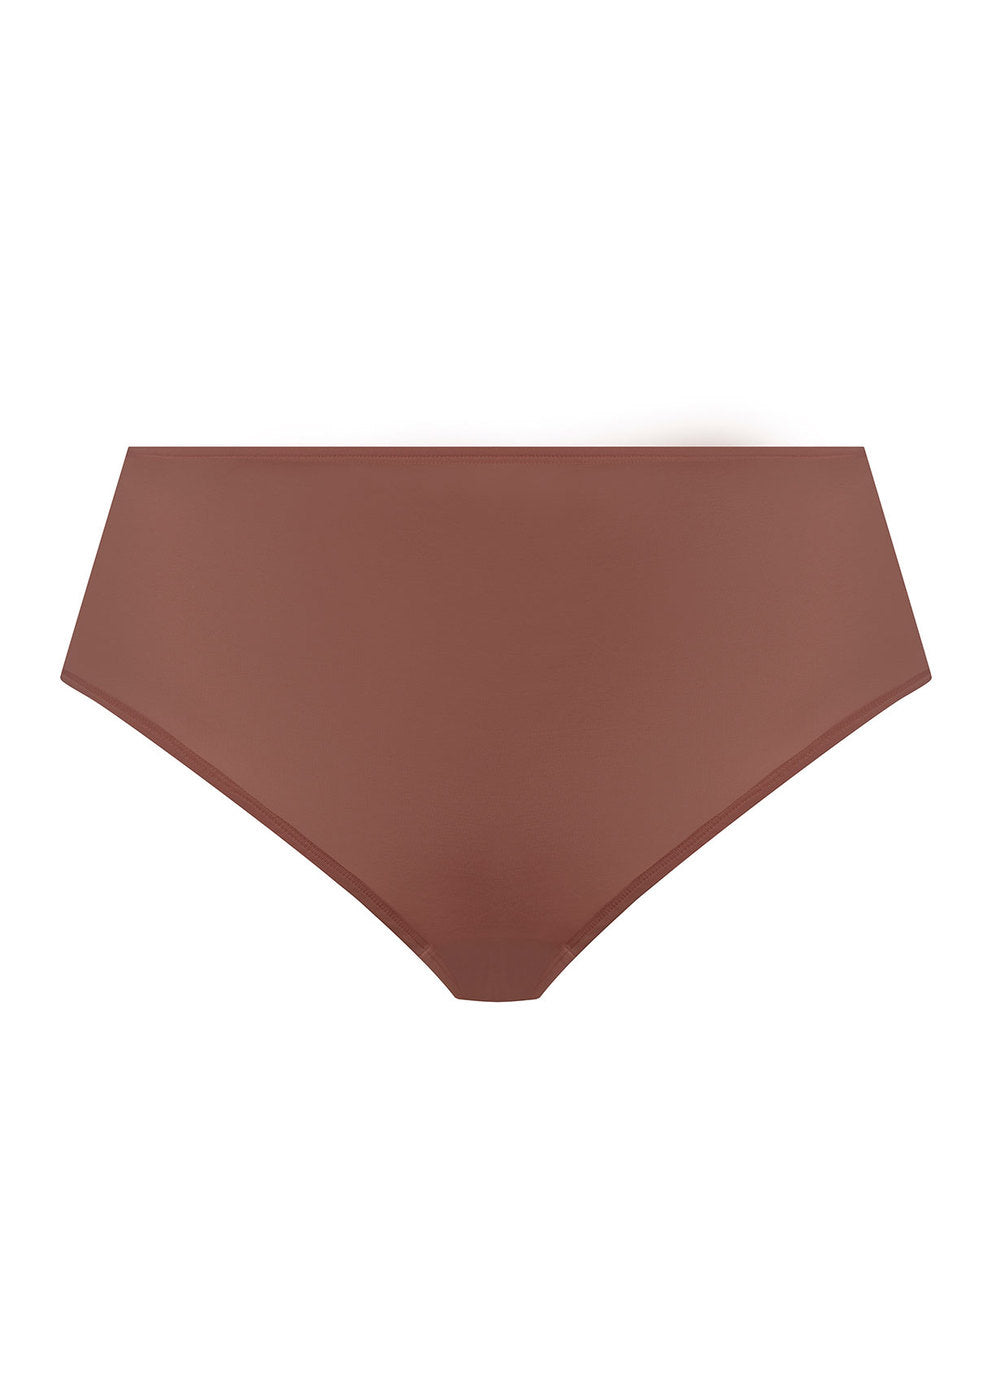 product view ofExperience all day comfort with the Smooth Full Brief Panty from Elomi in clove